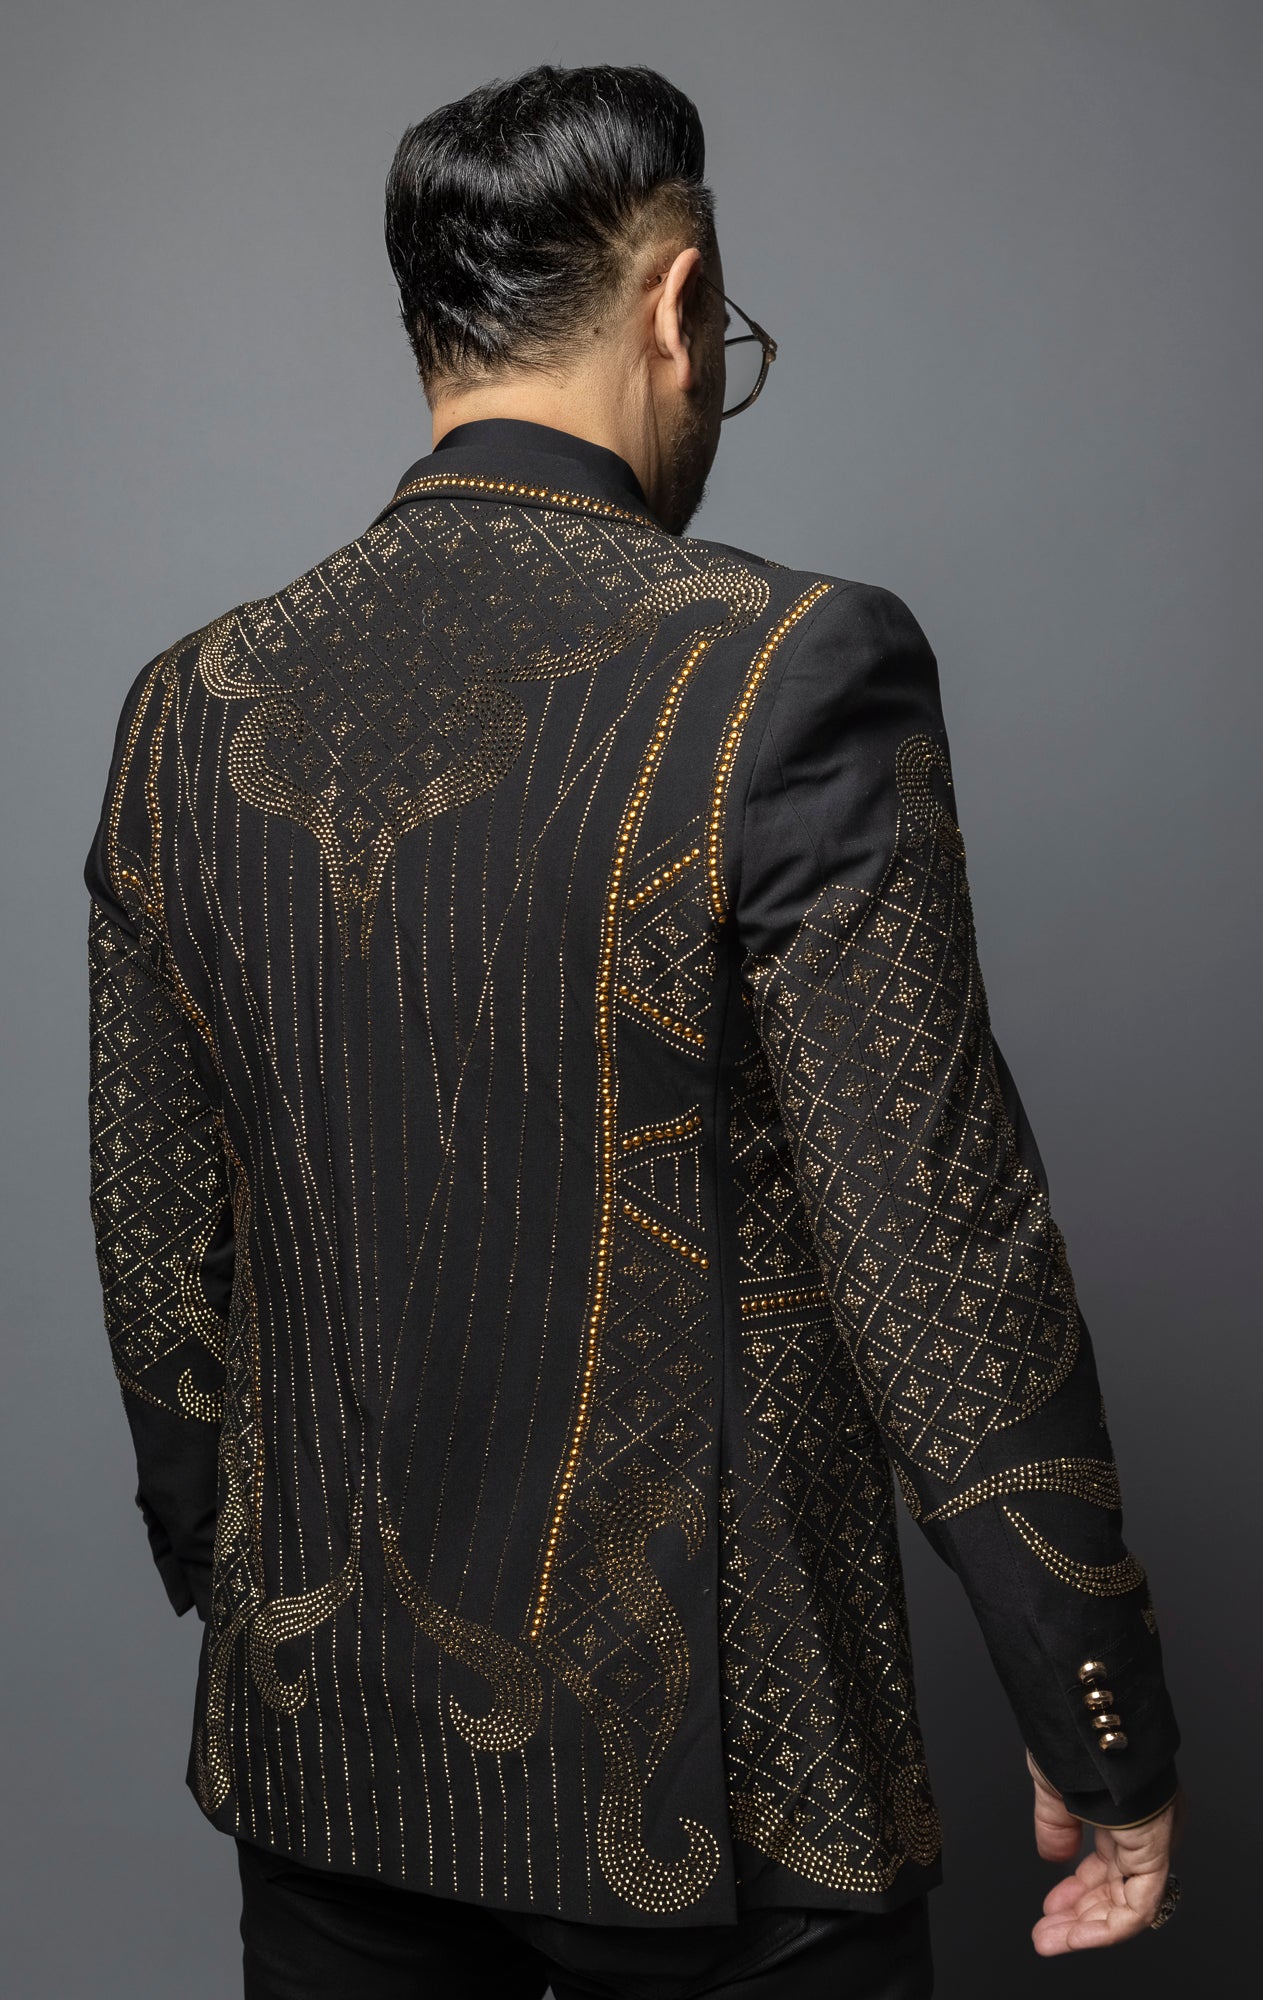 Exuding elegance, this blazer features a unique design embellished with gold rhinestones and a sleek cut.